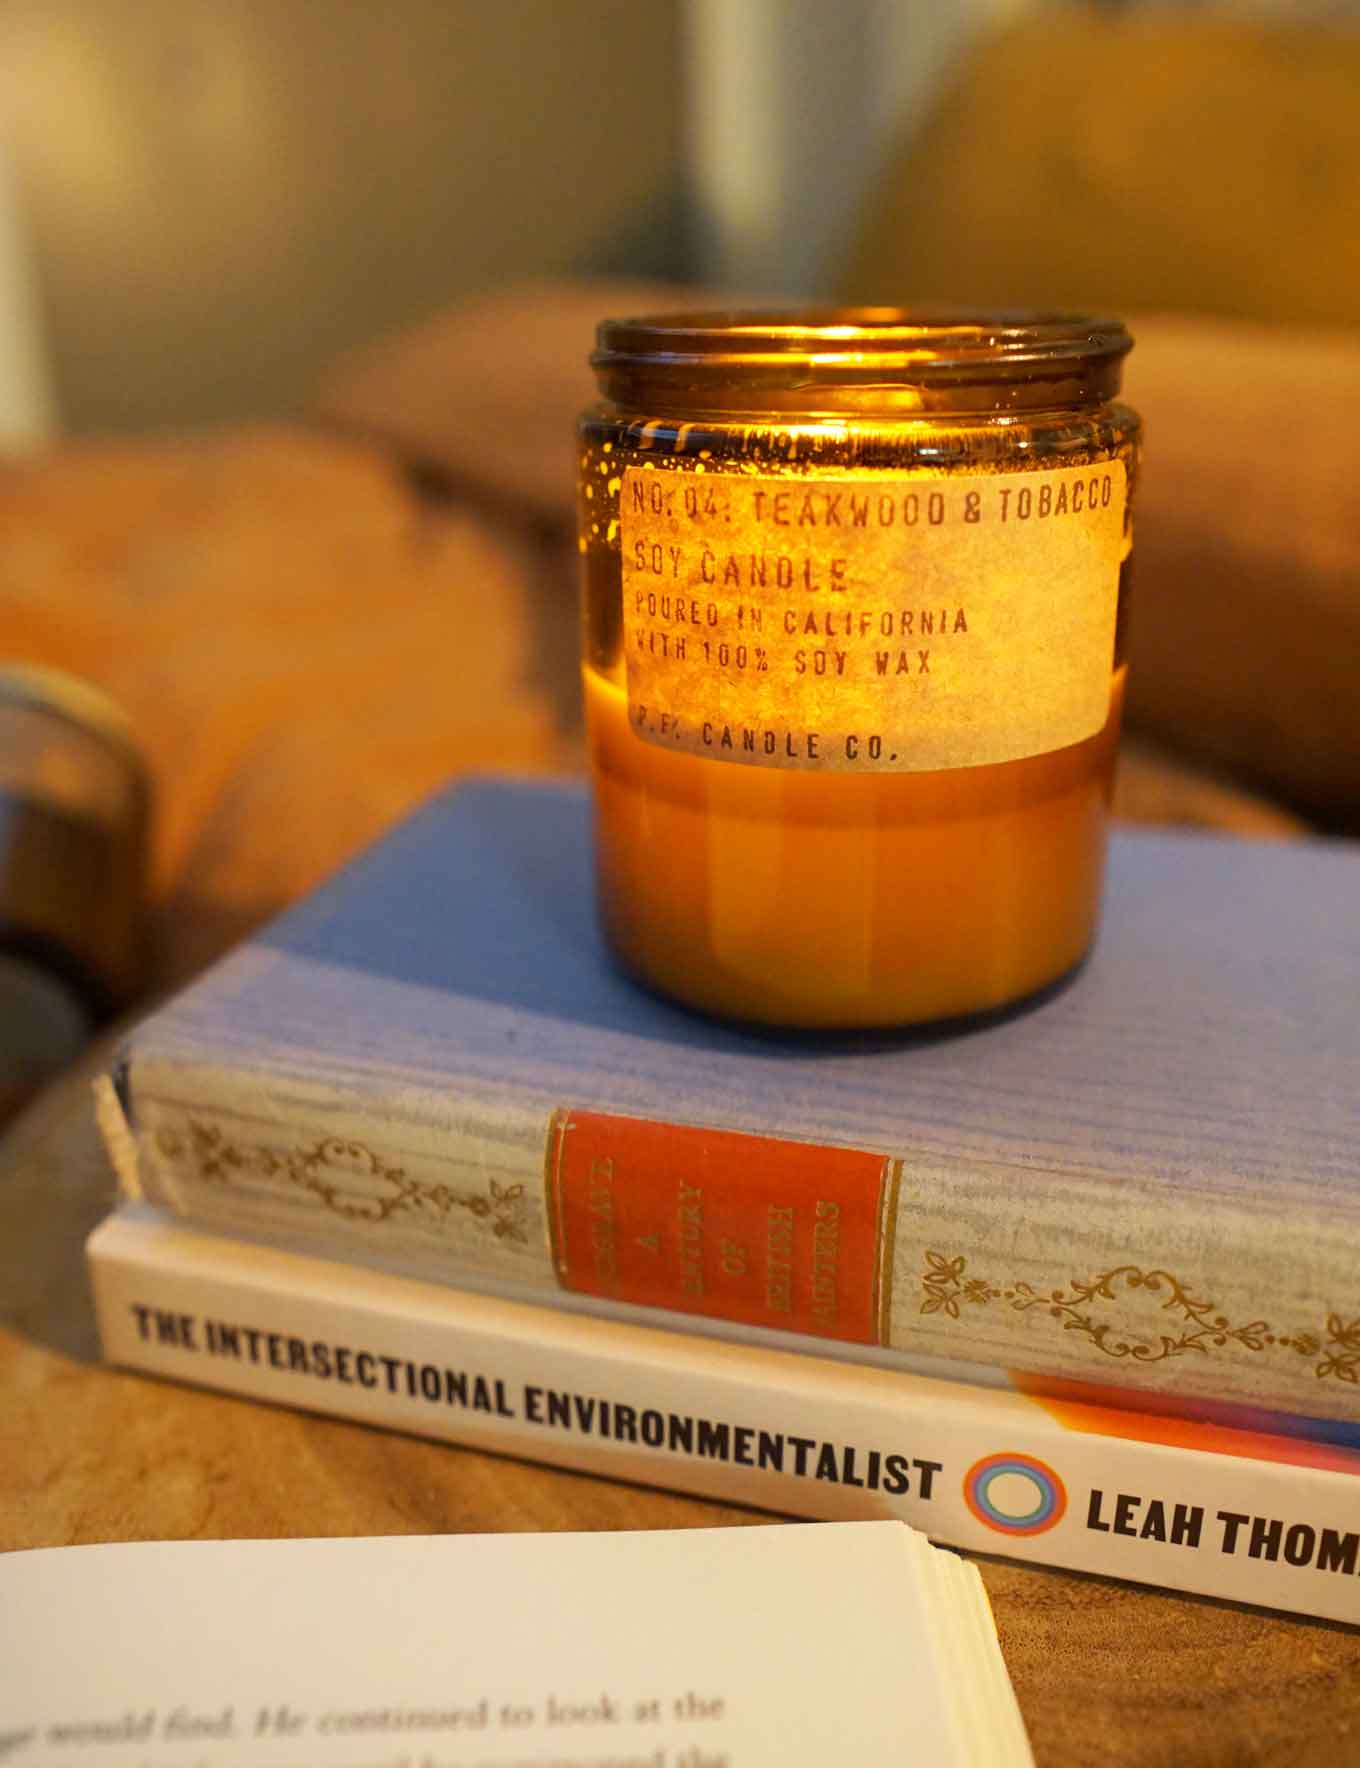 Lit candle with a label that says No 04: Teakwood & Tobacco, Soy Candle, Poured in California with 100% soy wax, P.F. Candle Co